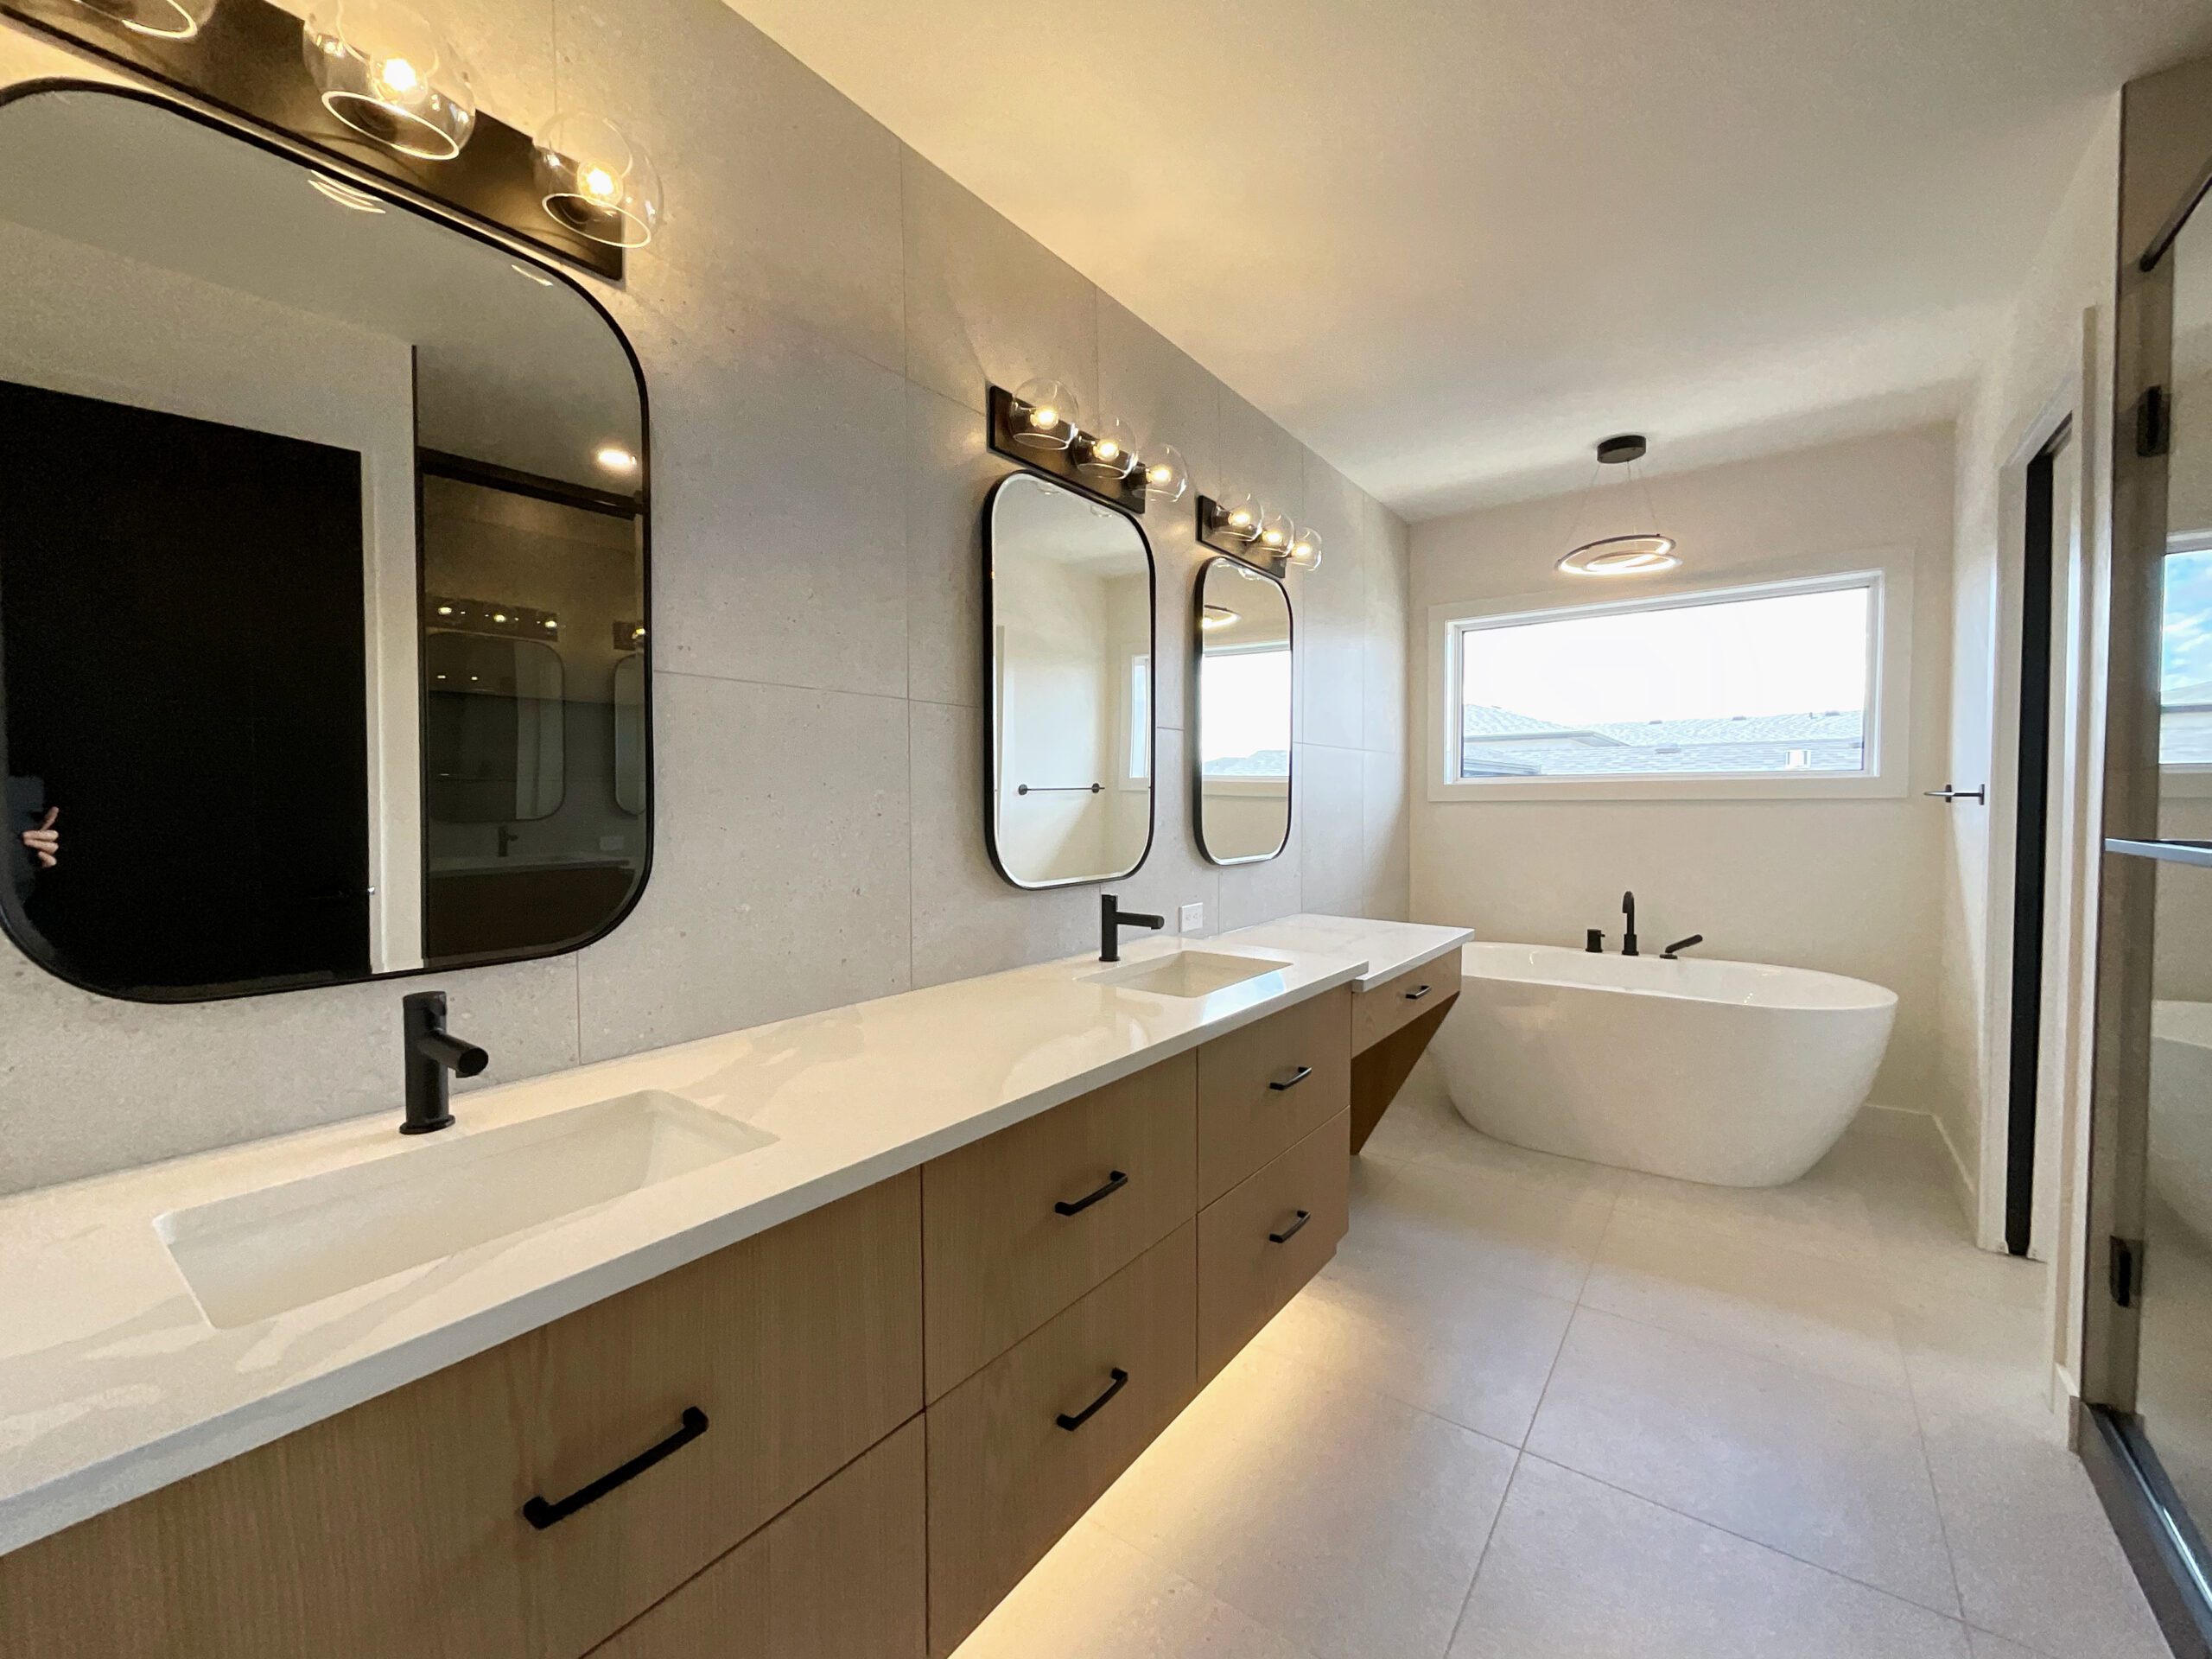 The primary ensuite bathroom with double sinks, makeup counter, oval mirrors, a freestanding tub with modern chandelier above, and tiled flooring which also serves as a backsplash running the whole wall of the vanity.